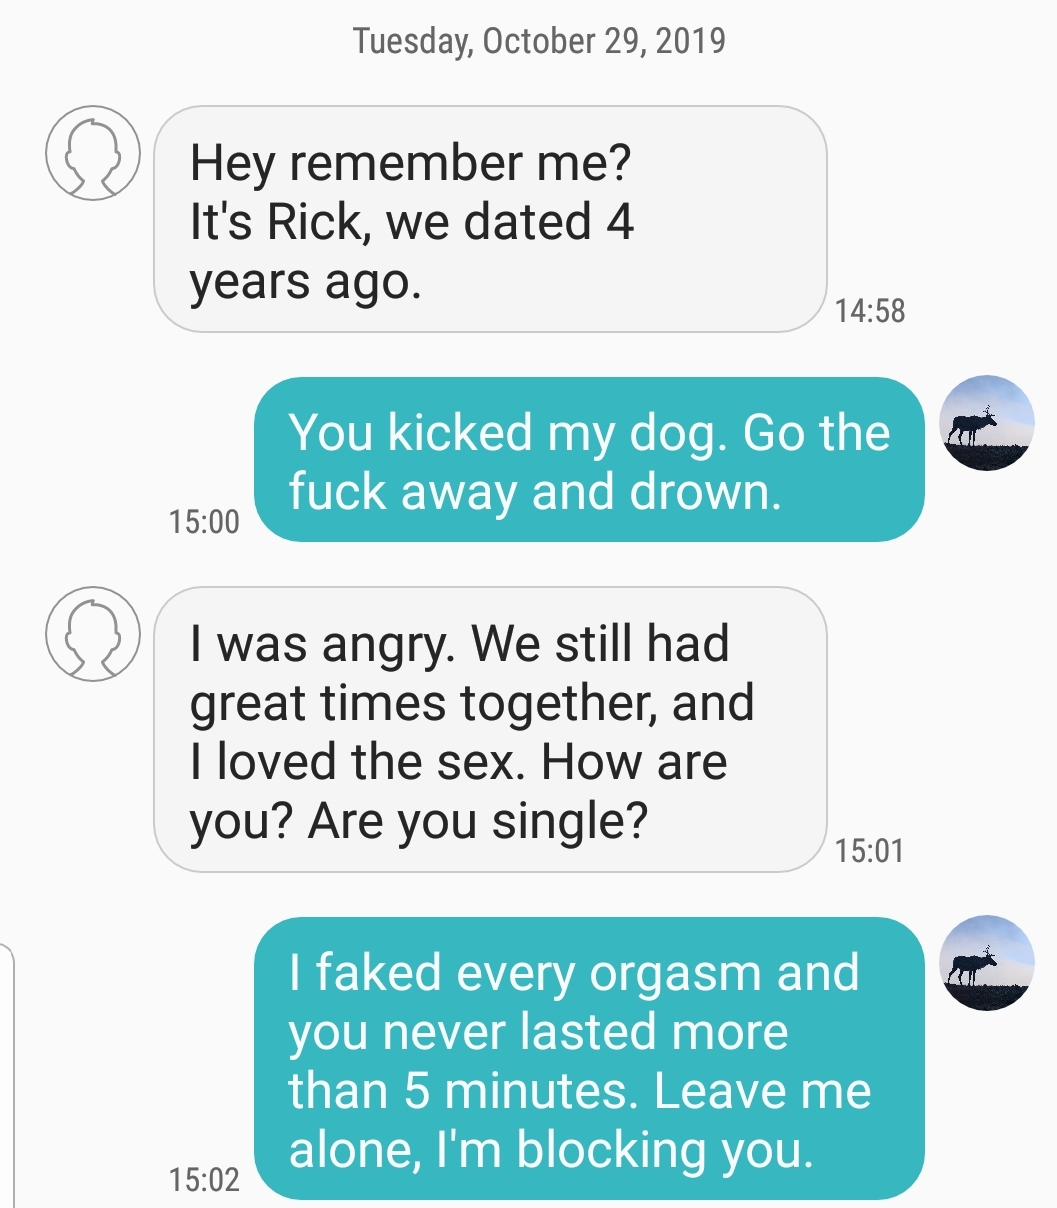 number - Tuesday, Hey remember me? It's Rick, we dated 4 years ago. You kicked my dog. Go the fuck away and drown. I was angry. We still had great times together, and I loved the sex. How are you? Are you single? I faked every orgasm and you never lasted 